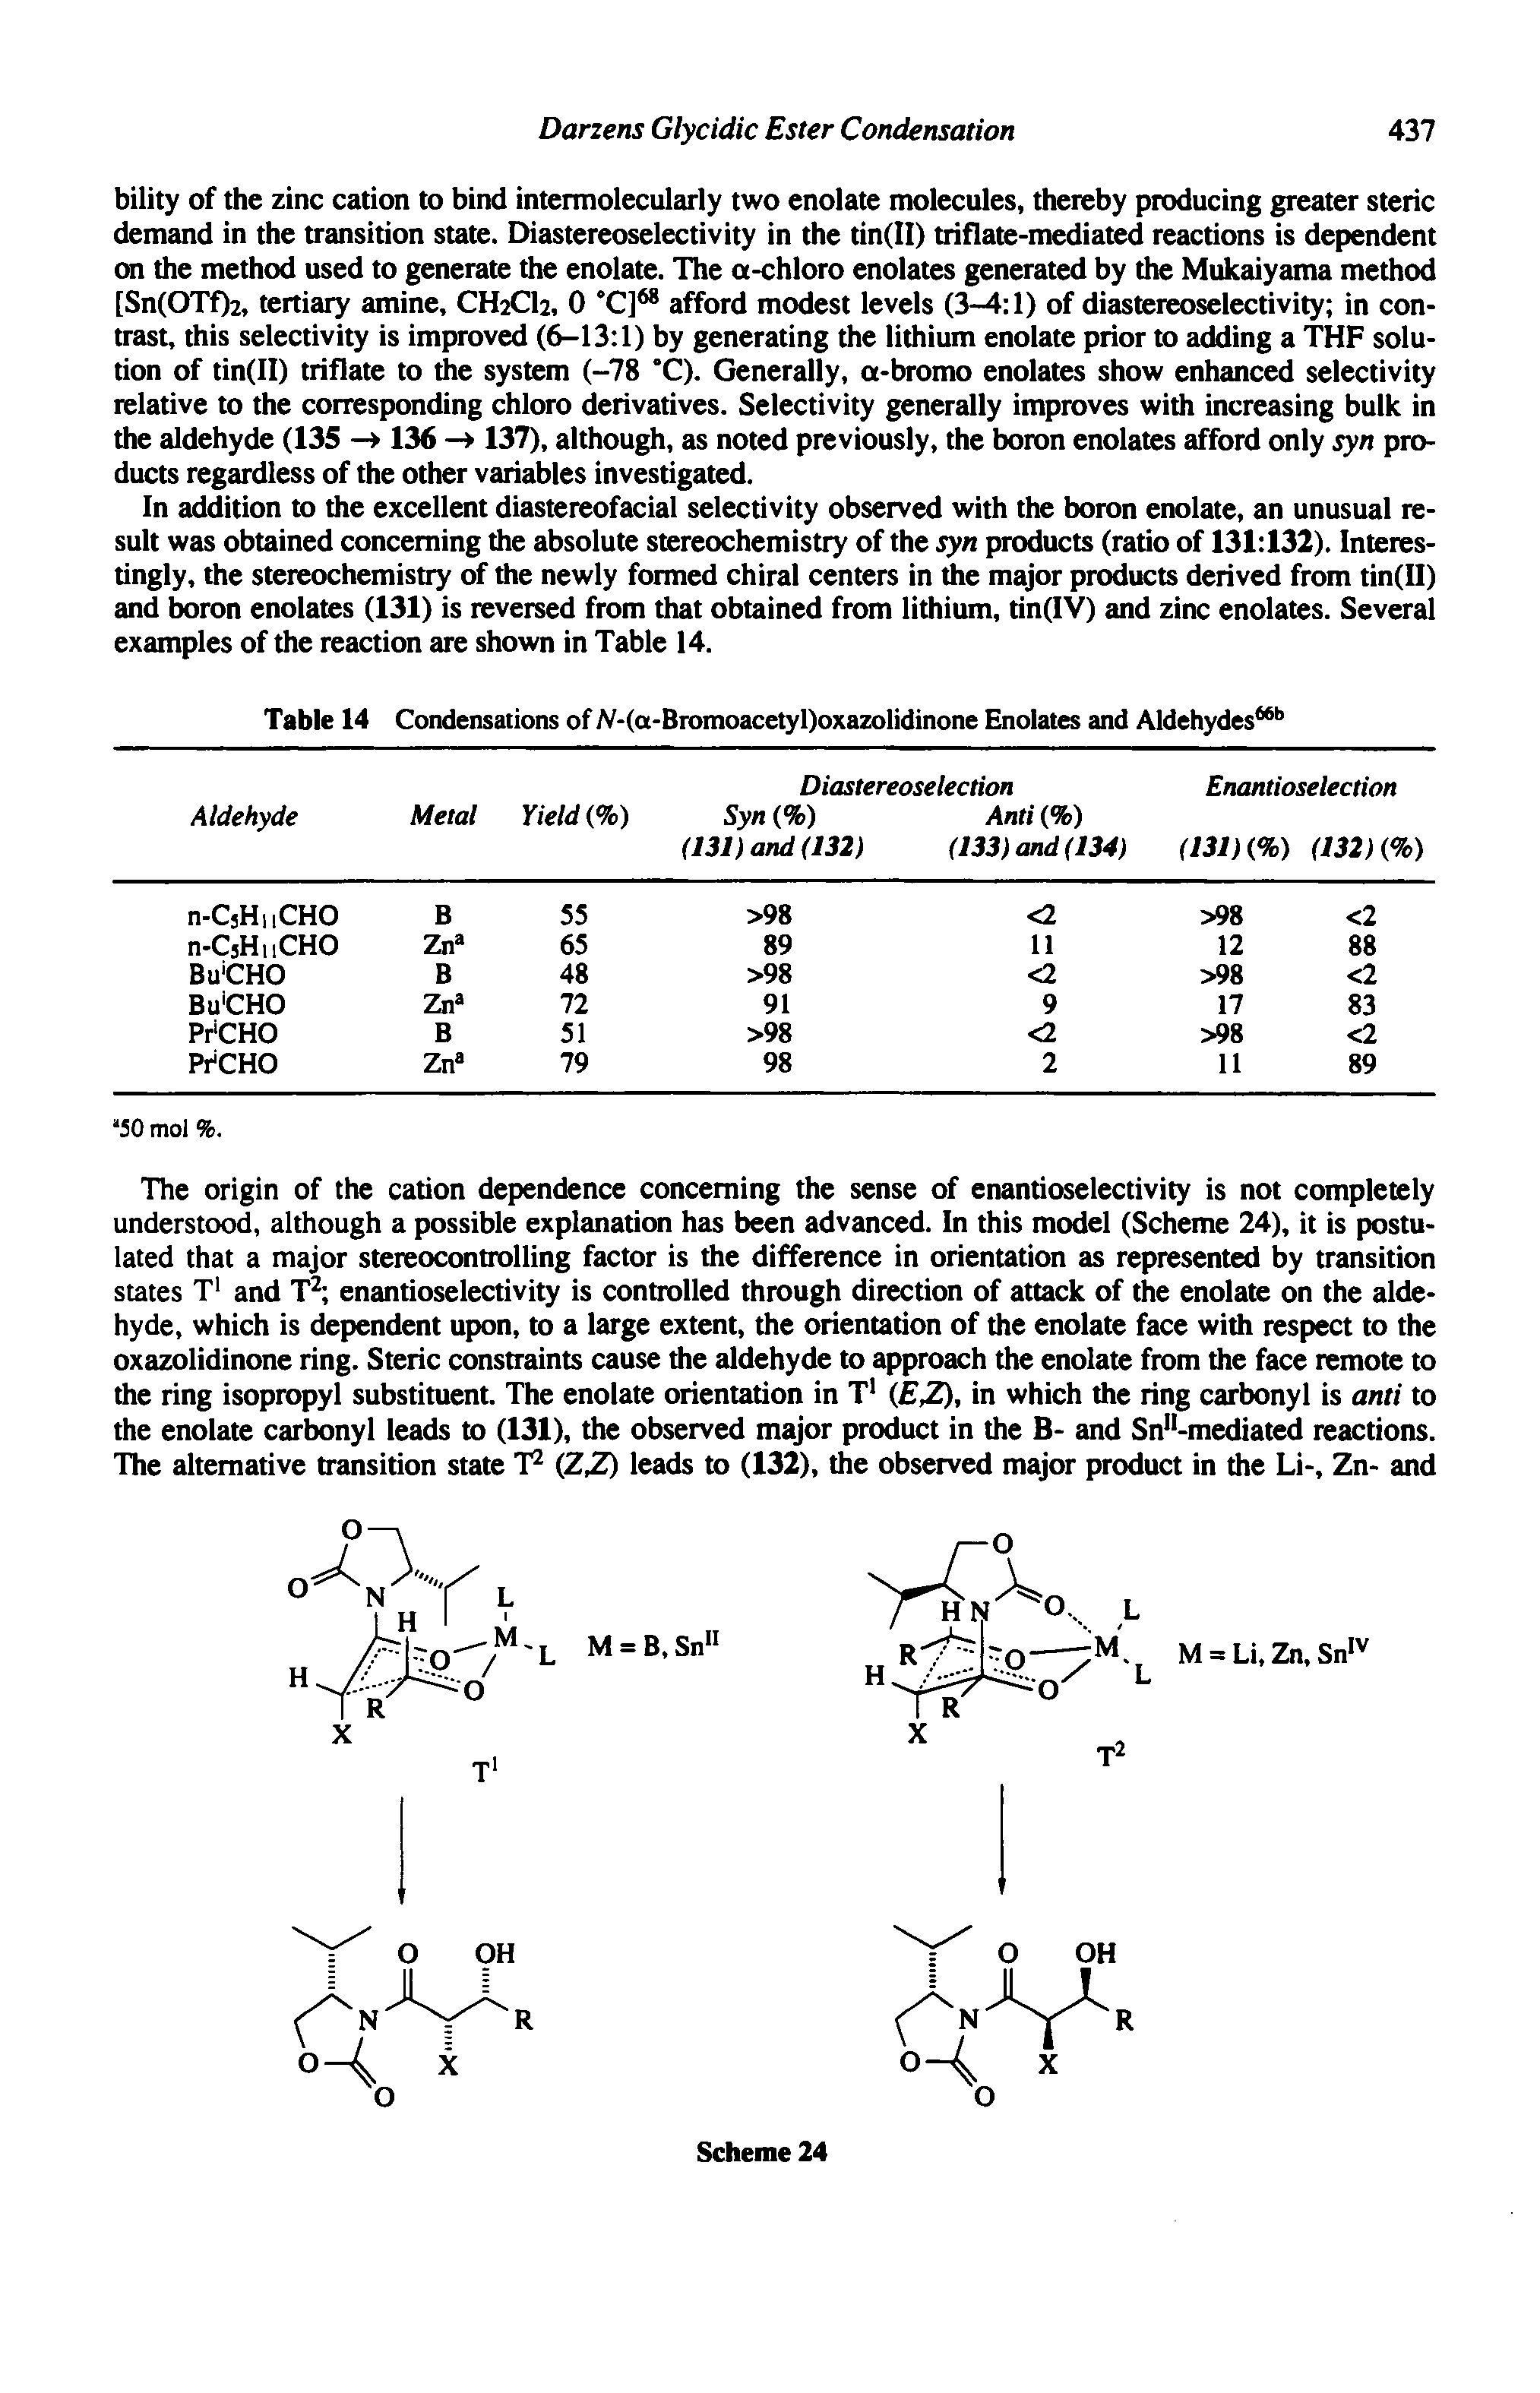 Table 14 Condensations of A/-(a-Bromoacetyl)oxazolidinone Enolates and Aldehydes ...